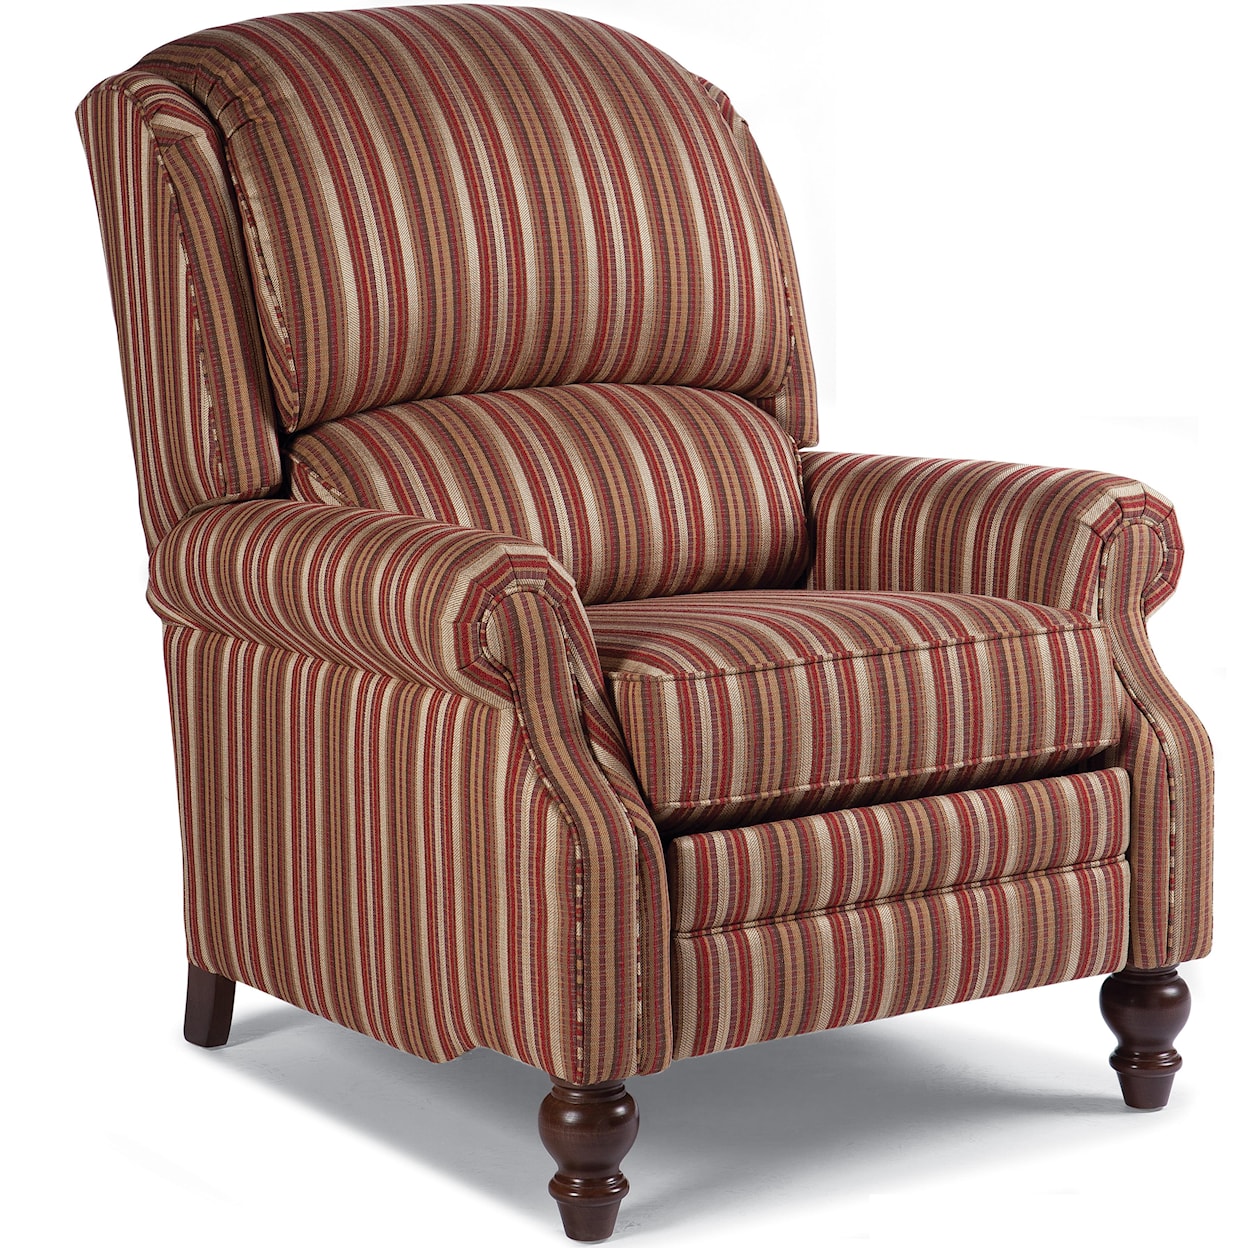 Smith Brothers 705 Pressback Reclining Chair